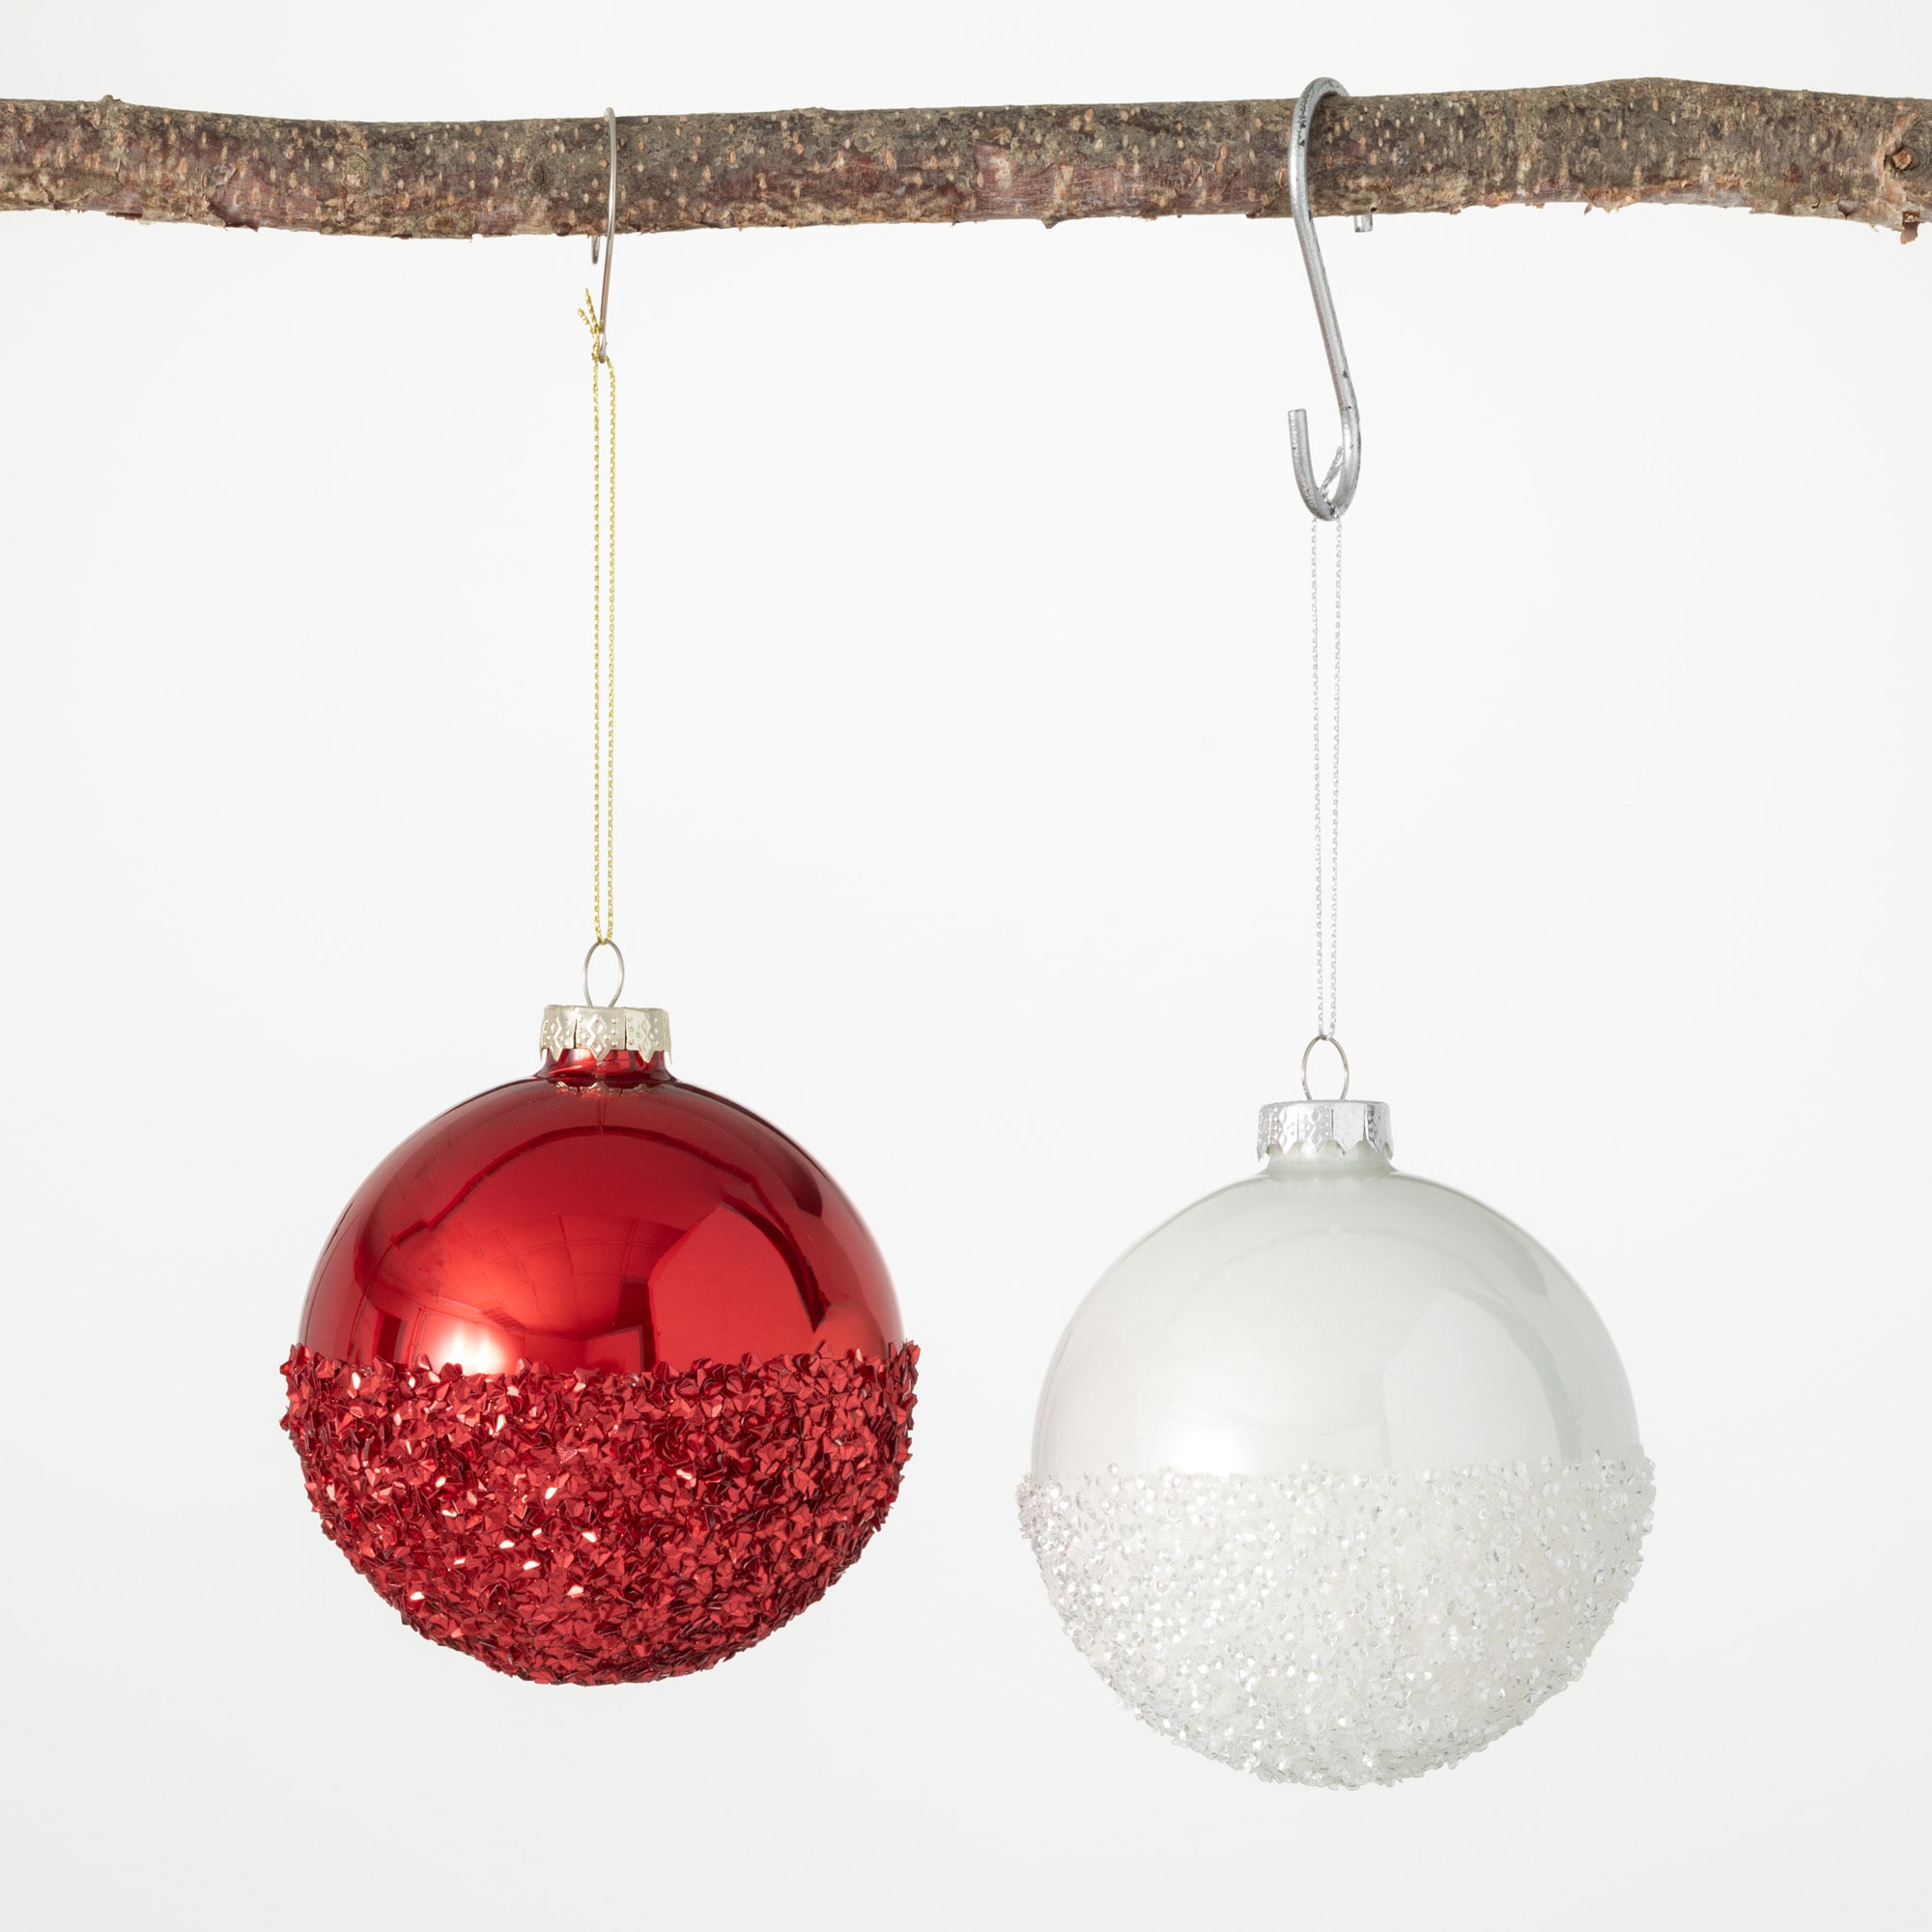 Sullivans 2-Pack Red Ball Standard Indoor Ornament Set in the Christmas ...